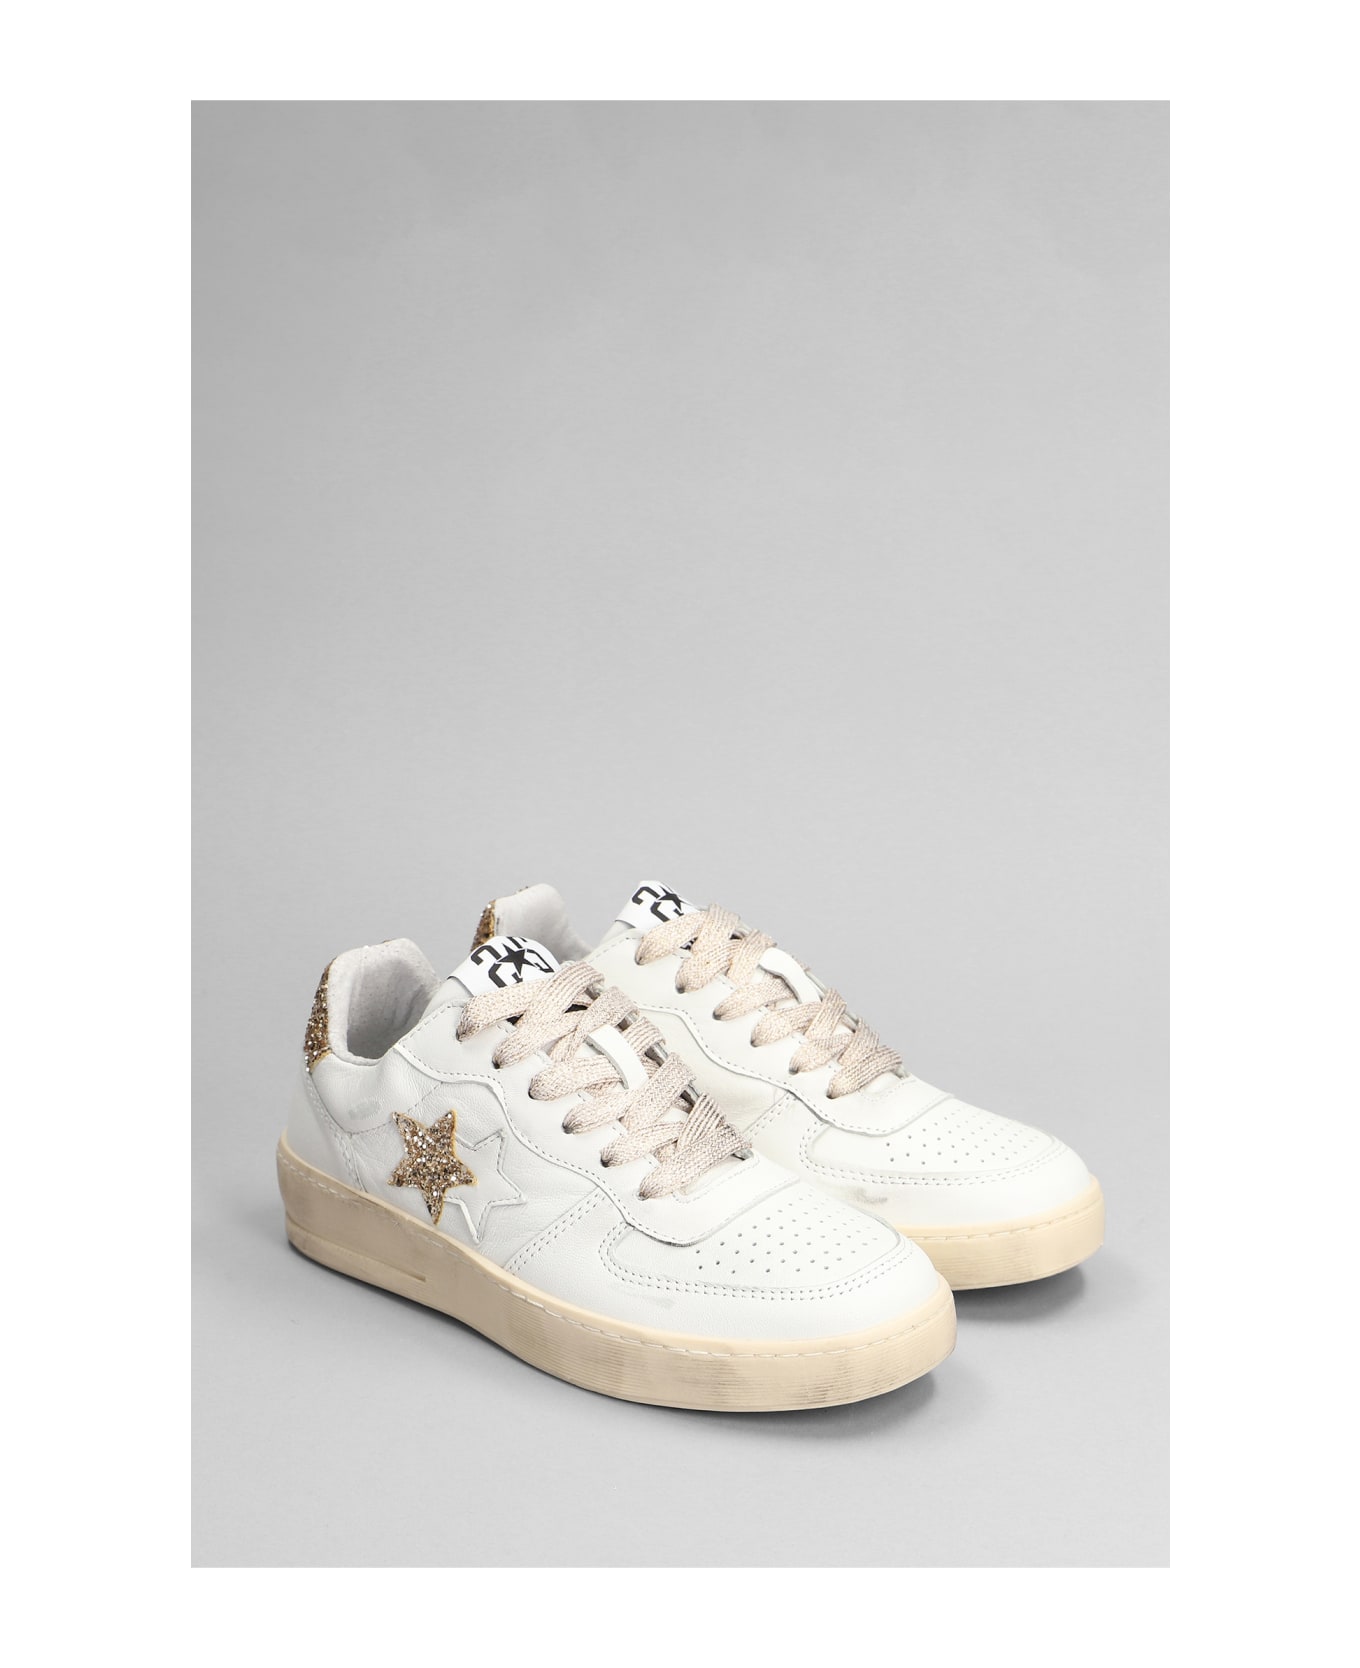 2Star Padel Star Sneakers In White Leather 2Star - WHITE スニーカー